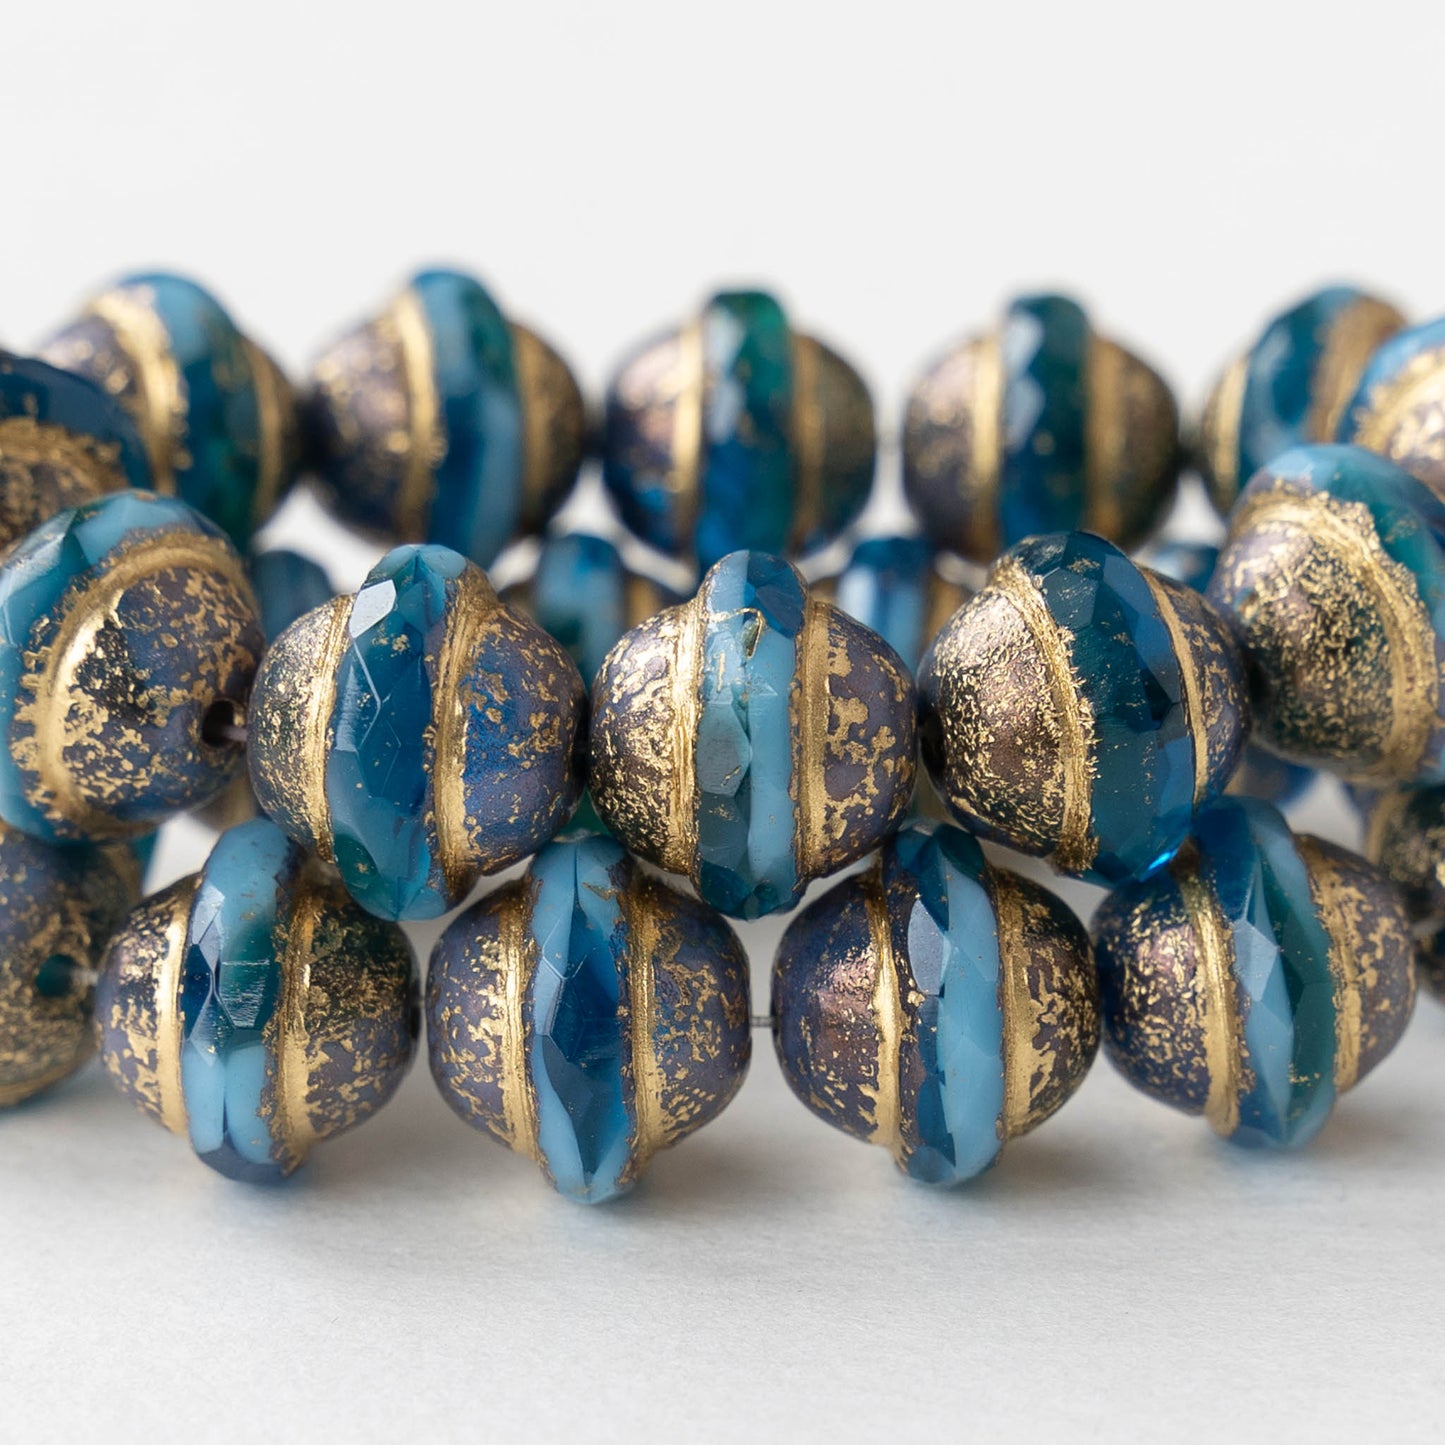 Load image into Gallery viewer, 10x12mm Saturn Beads - Teal and Sky Blue with Bronze and Gold Etched - 6 Beads
